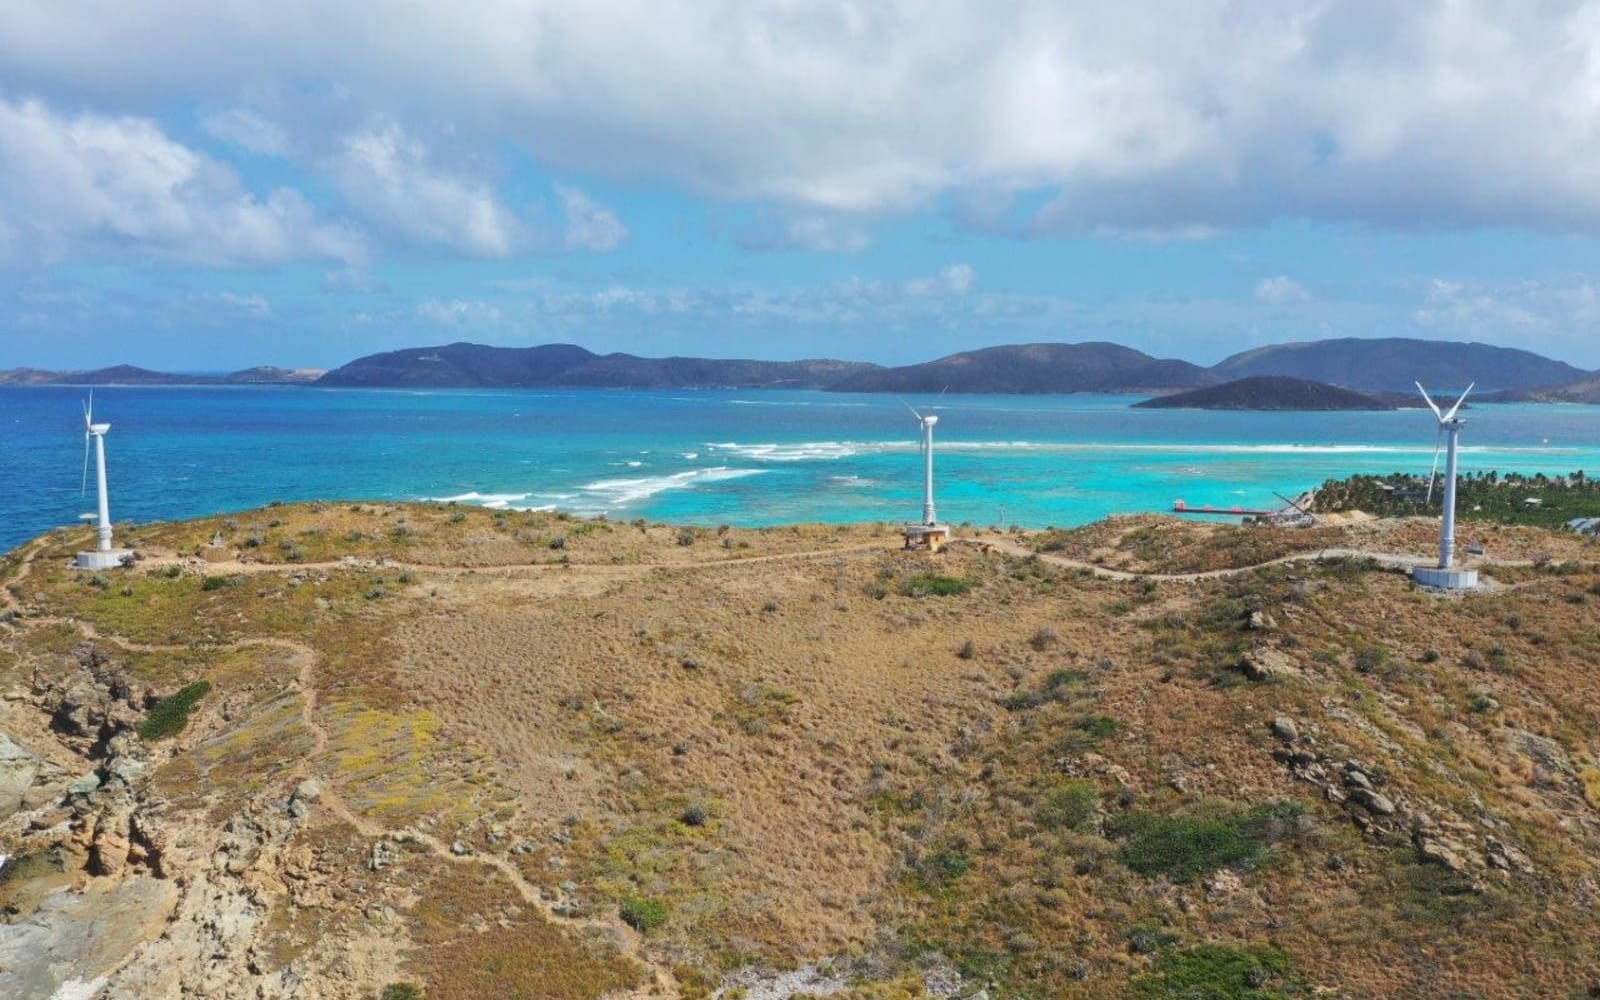 Wind turbines on Necker Island, with the ocean and islands in the background